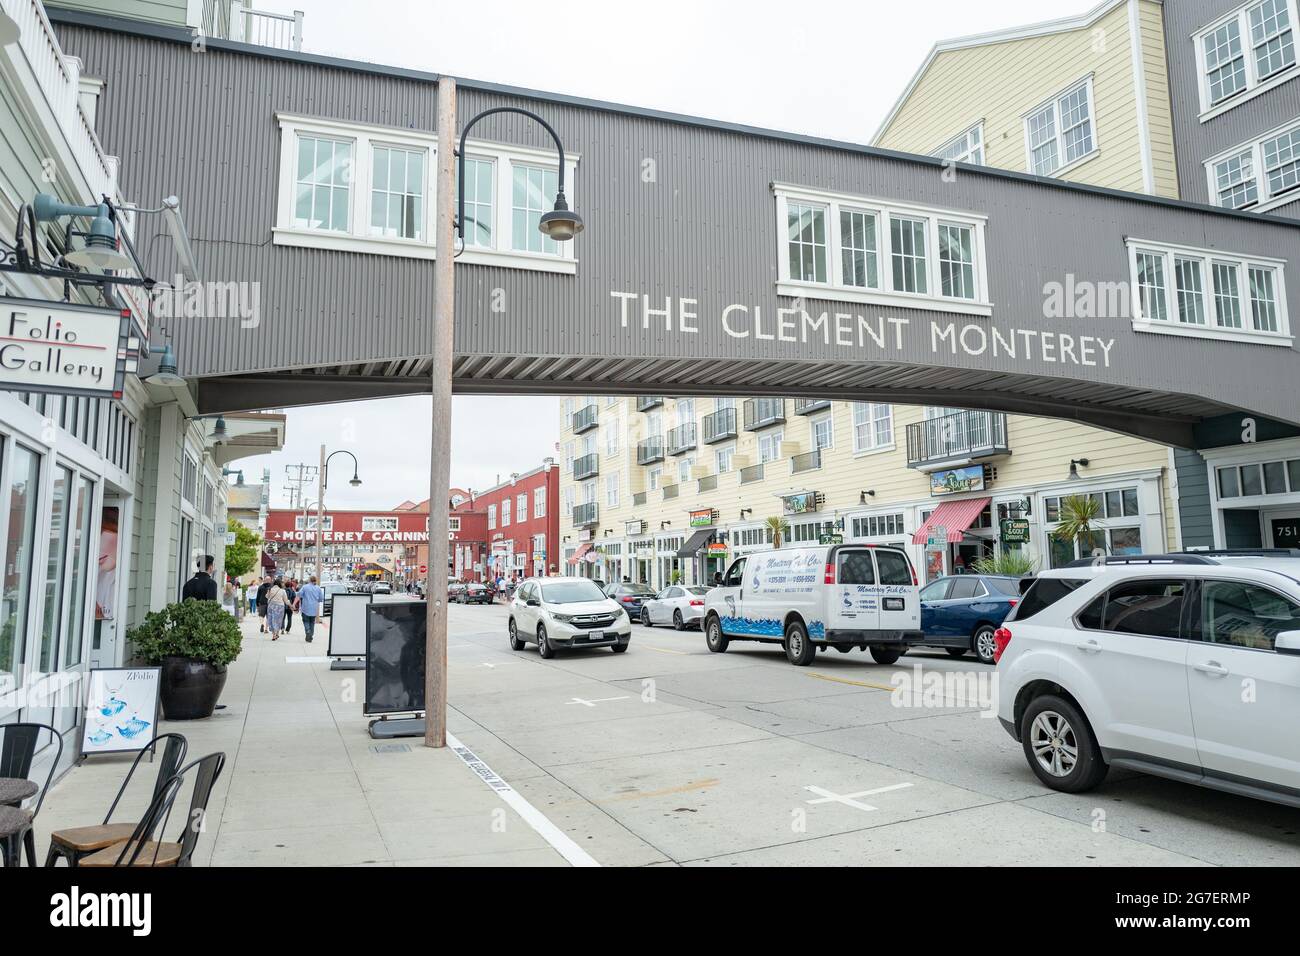 The Clement Monterey bridge on Cannery Row in downtown Monterey, California, July, 2021. () Stock Photo